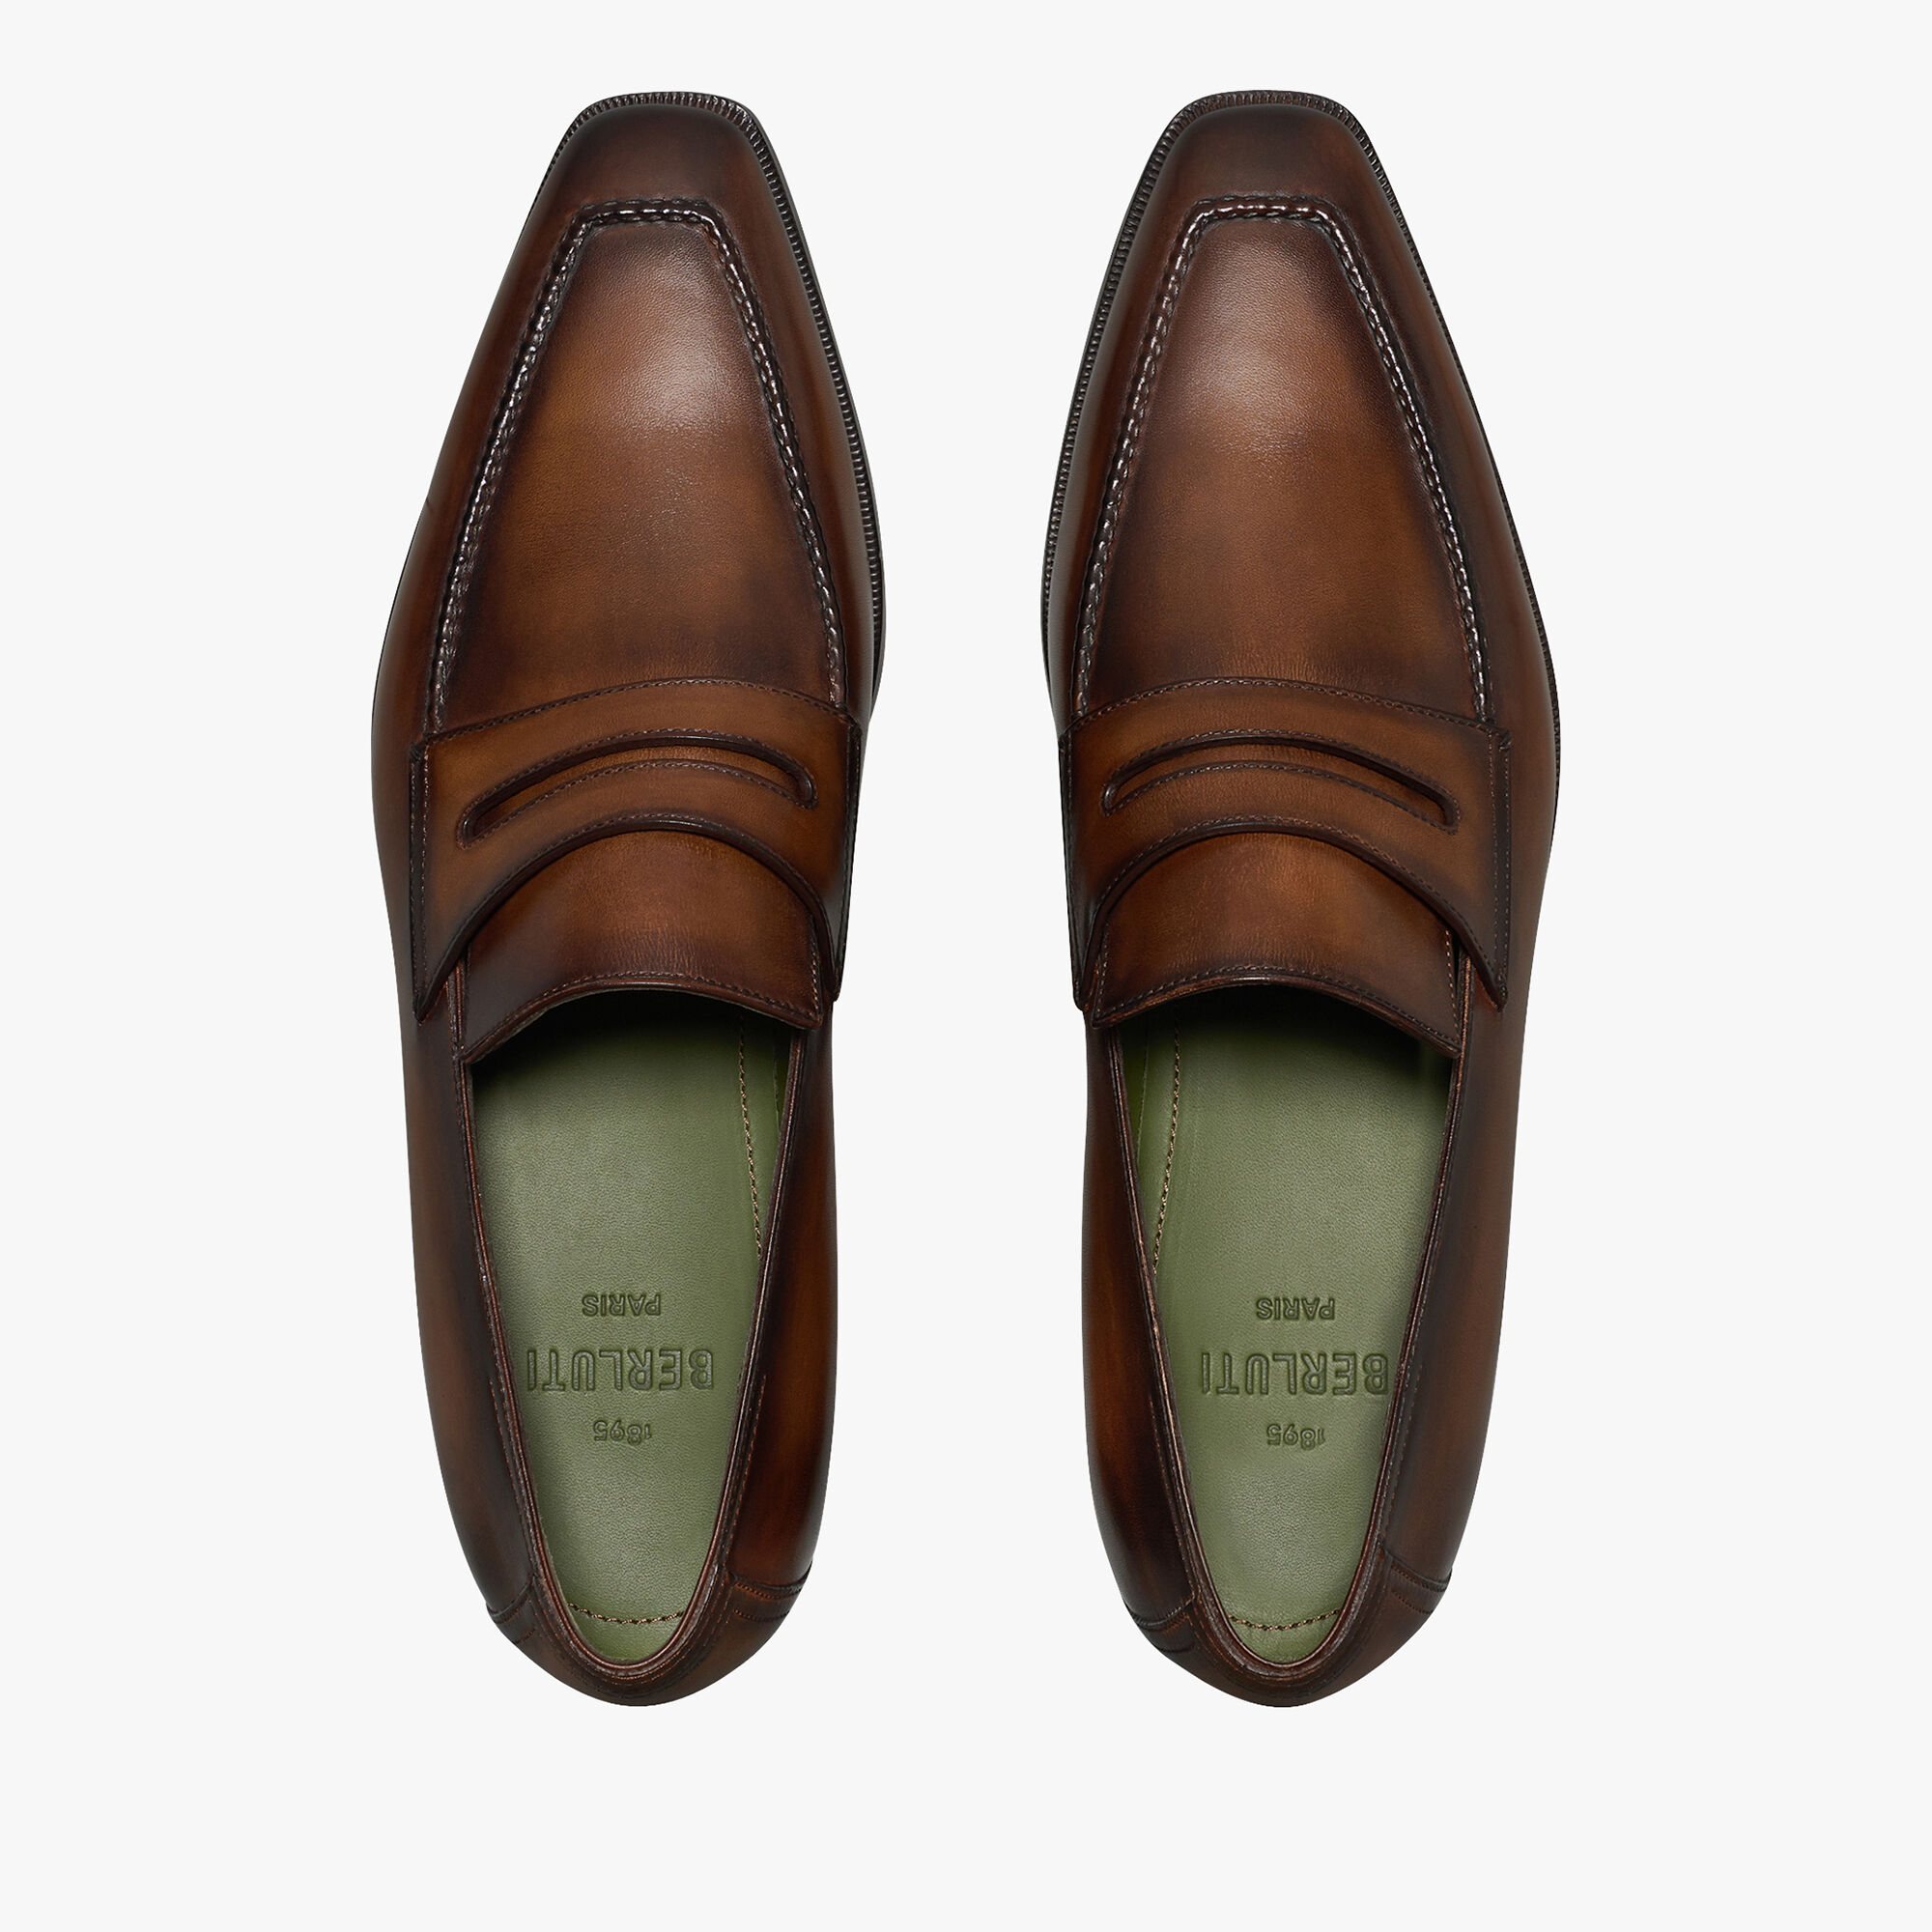 Berluti’s “Andy Démesure Leather Loafer”/Photos from the Berluti website